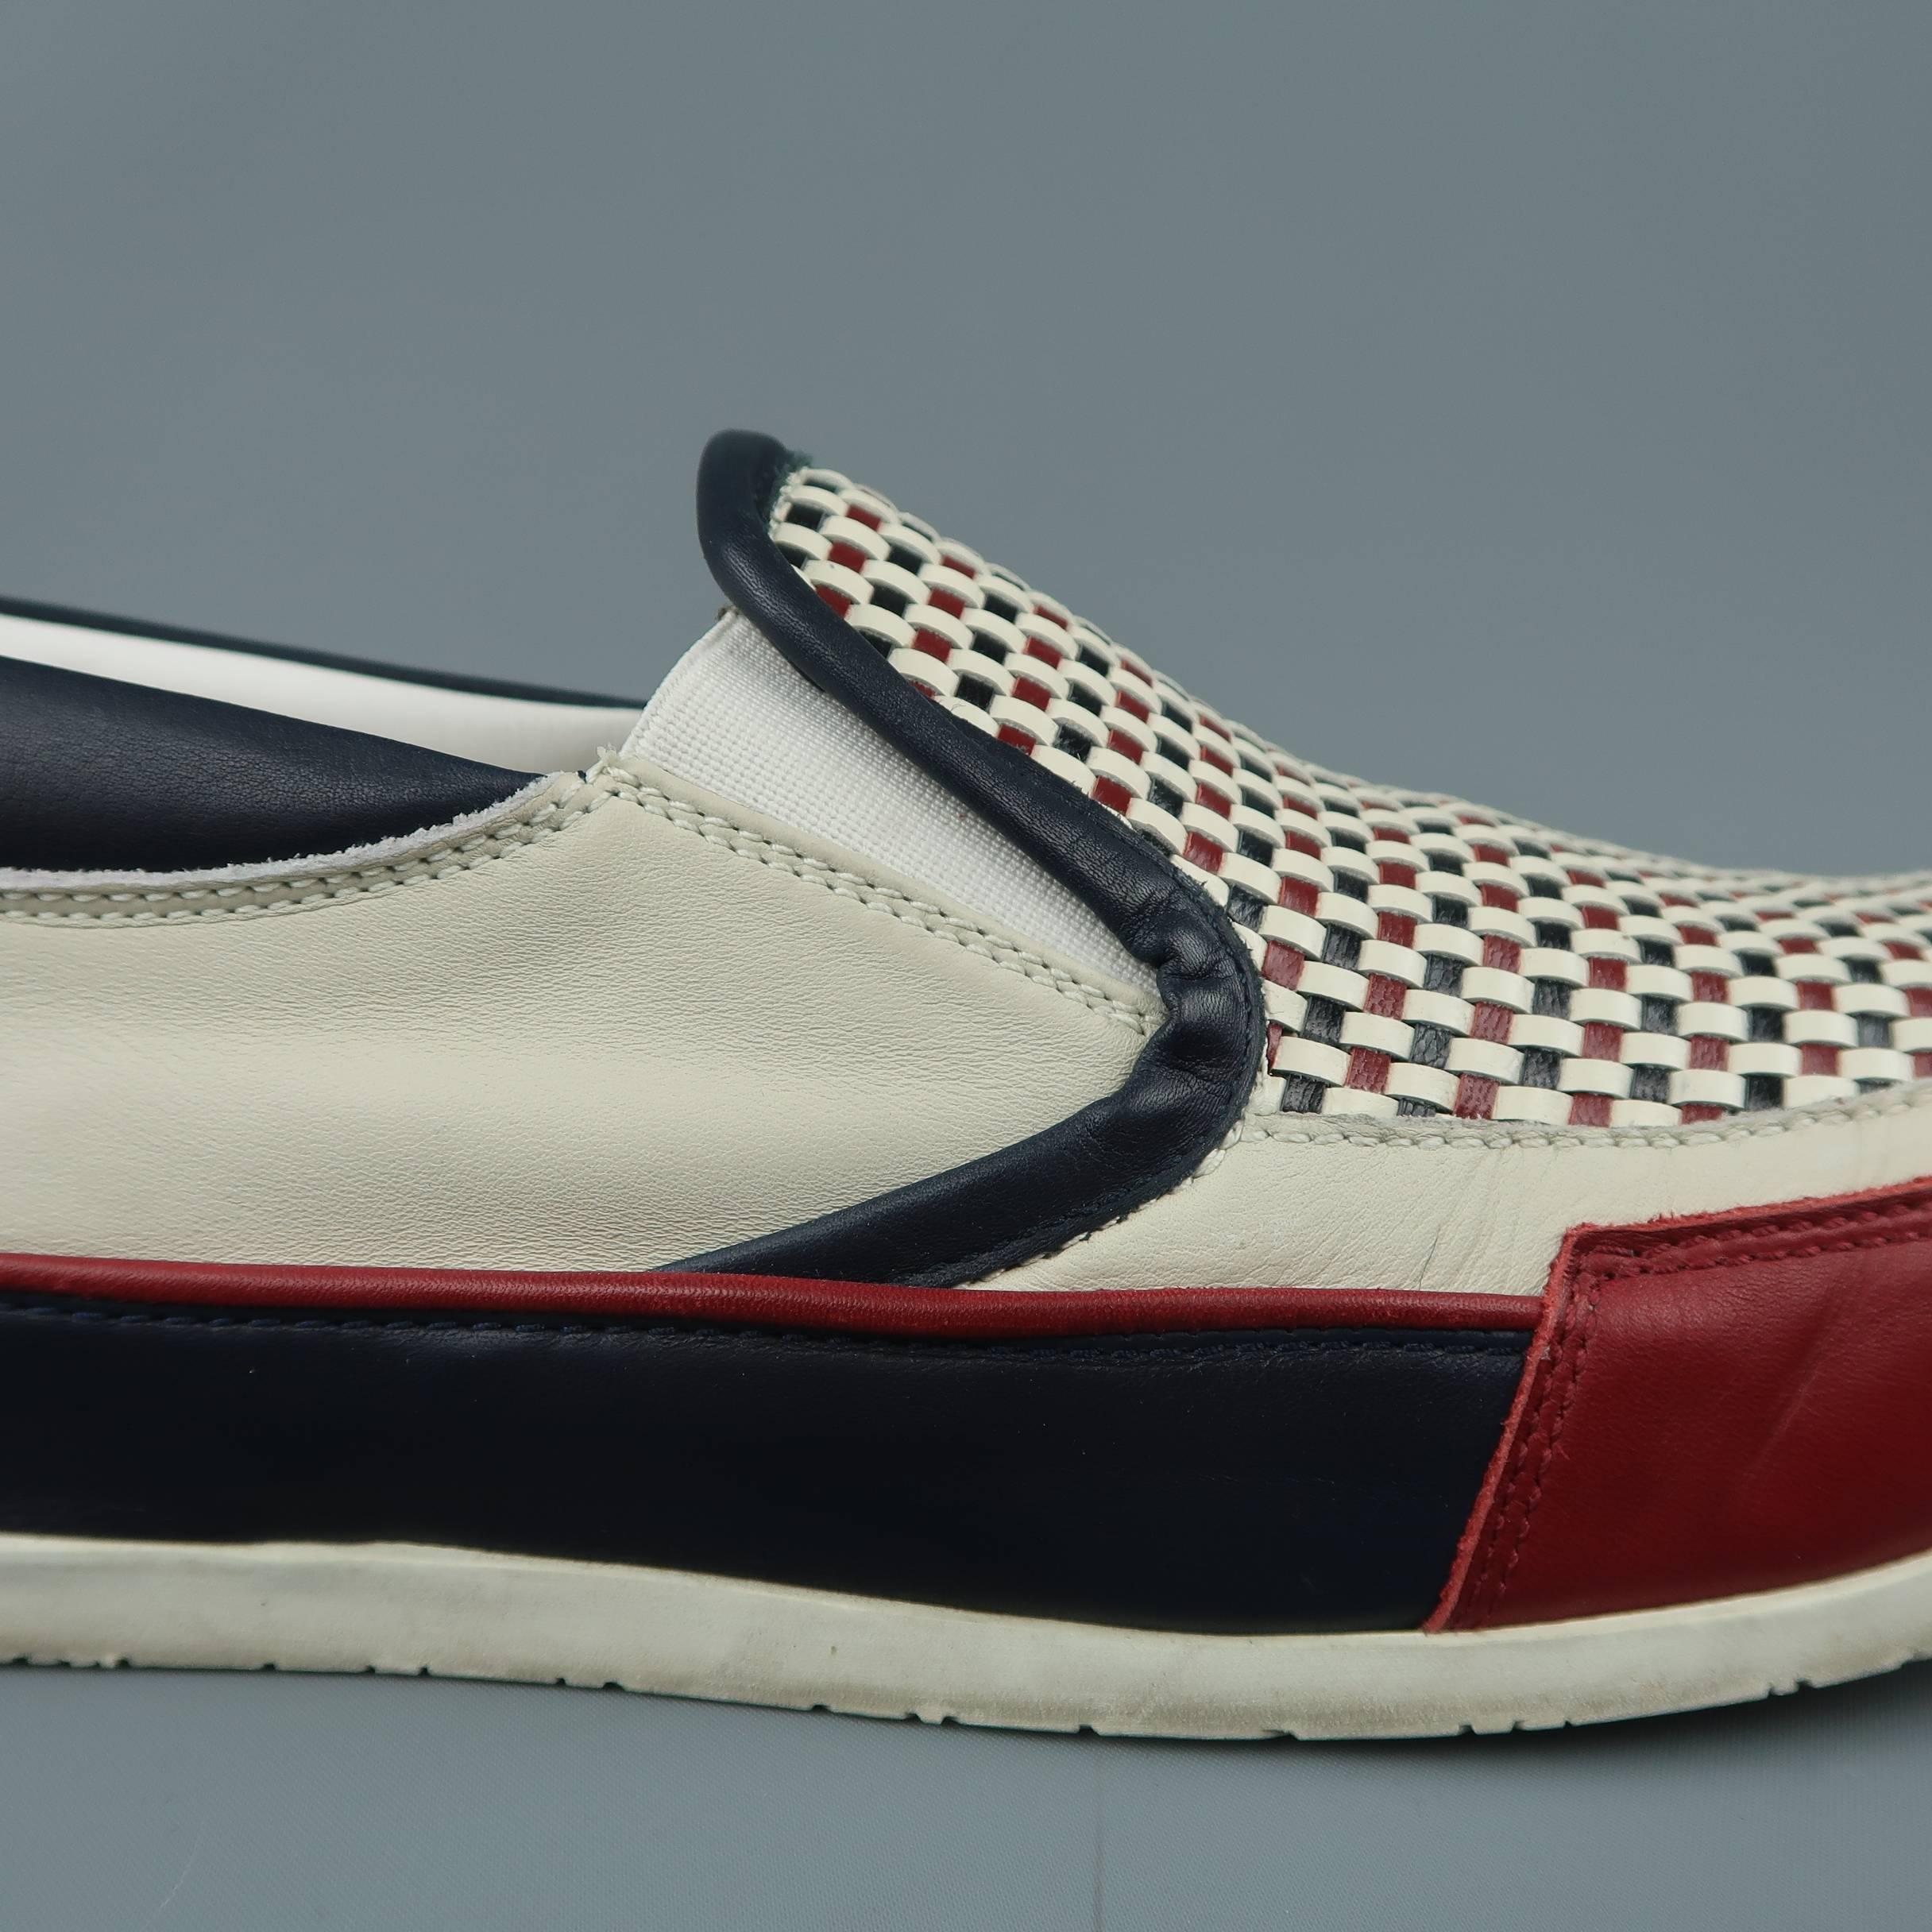 DSUQARED2 slip on sneakers come in cream leather with red, white, and blue woven apron toe and color block panels. Wear throughout. With box. Made in Italy.
 
Fair Pre-Owned Condition.
Marked: IT 46
 
Outsole: 12.5 x 4 in.
